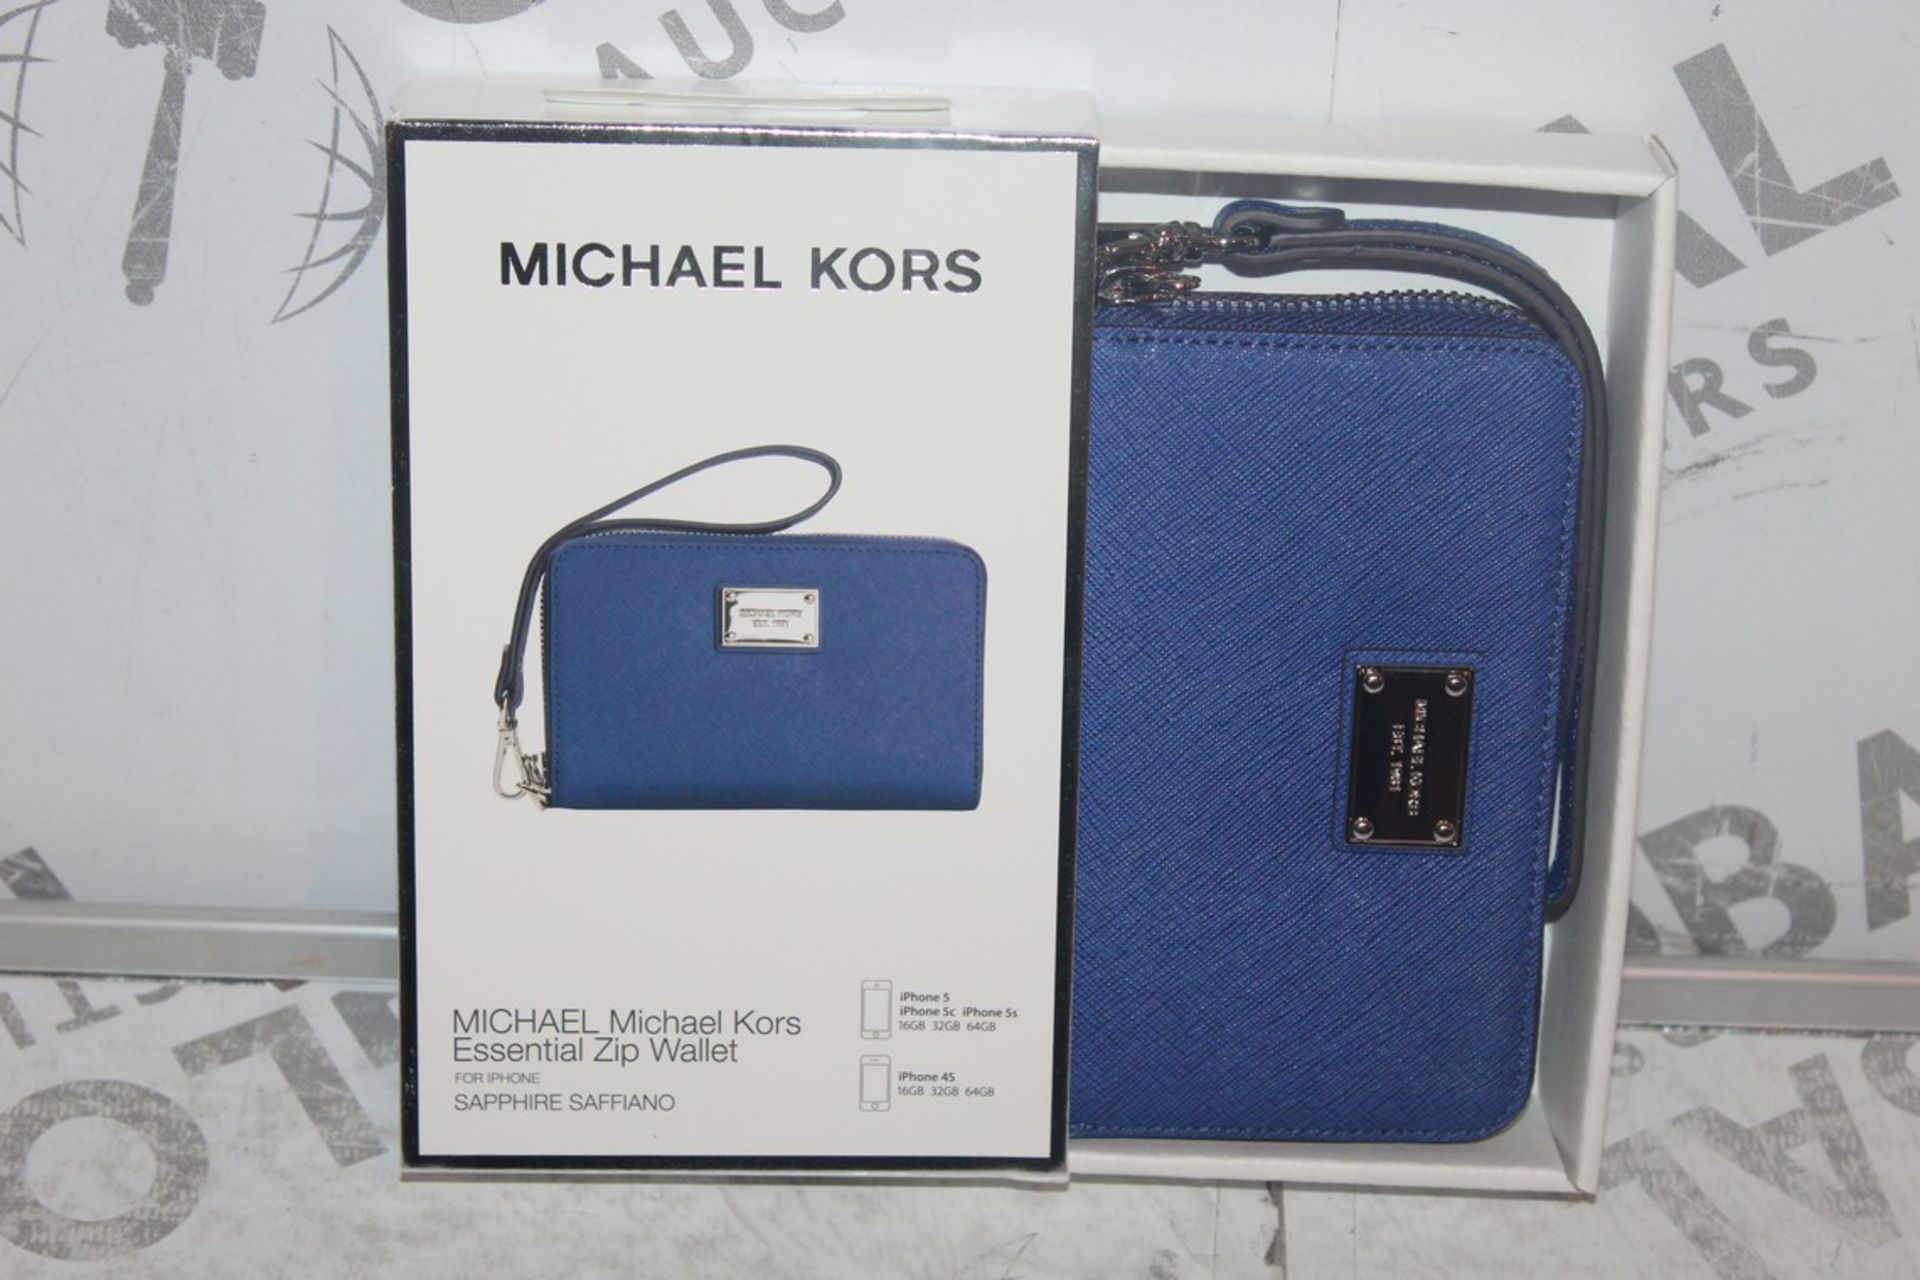 Lot to Contain 5 Boxed Brand New Michael Kors Sapphino Sapphire Essential Zip Wallet with Phone